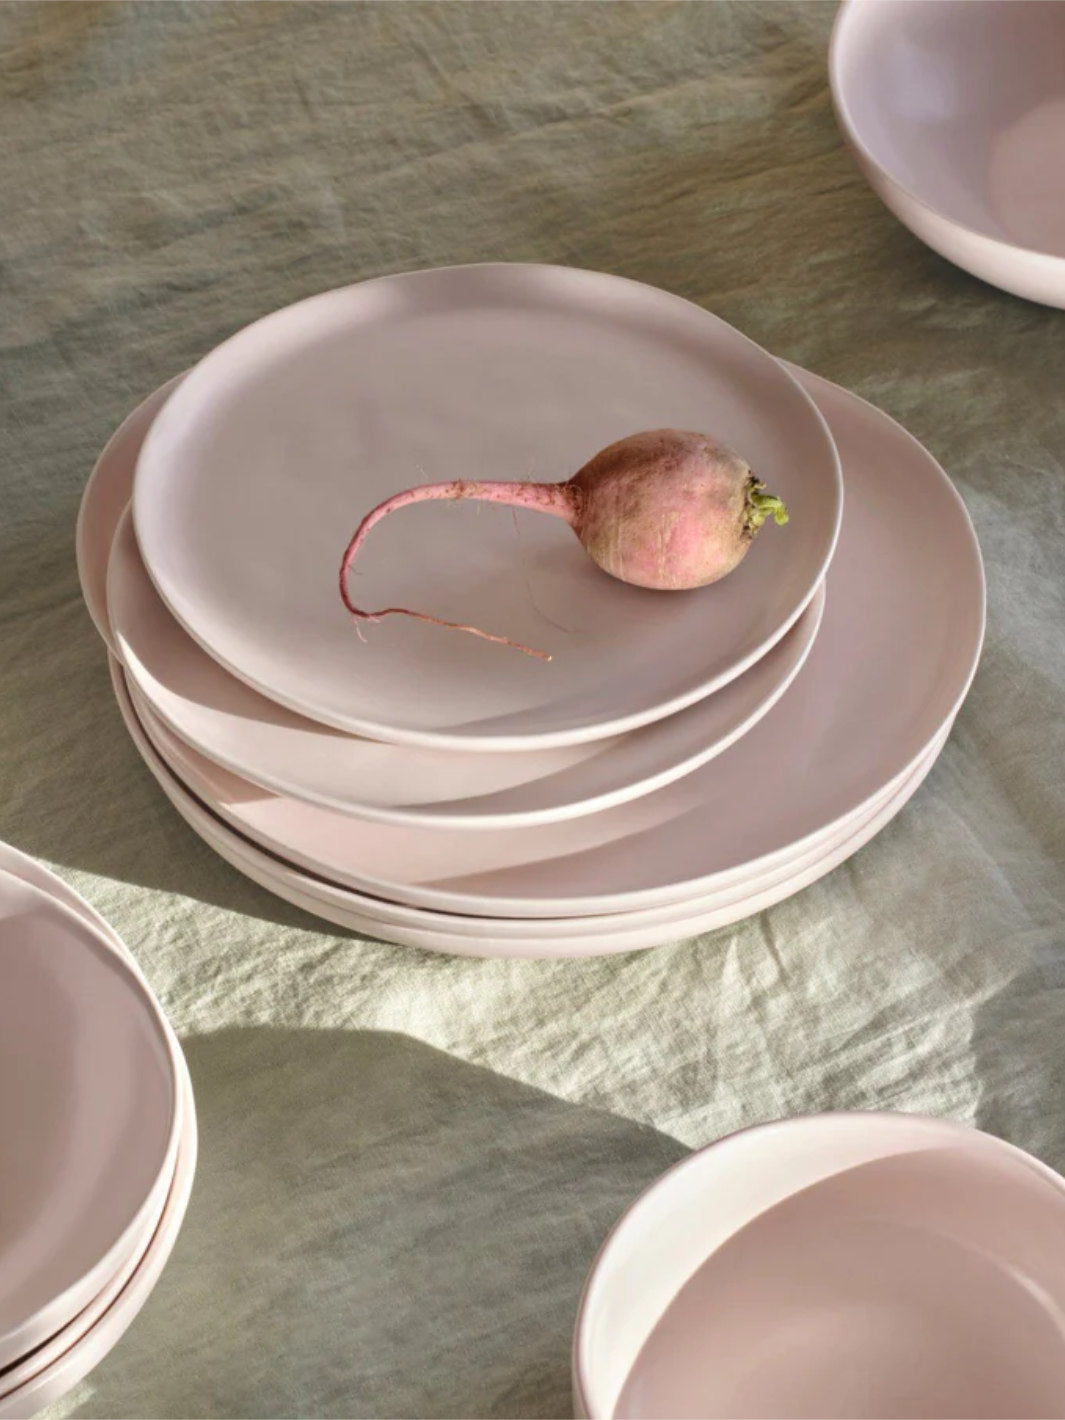 FABLE The Dinner Plates (4-Pack) / Plates